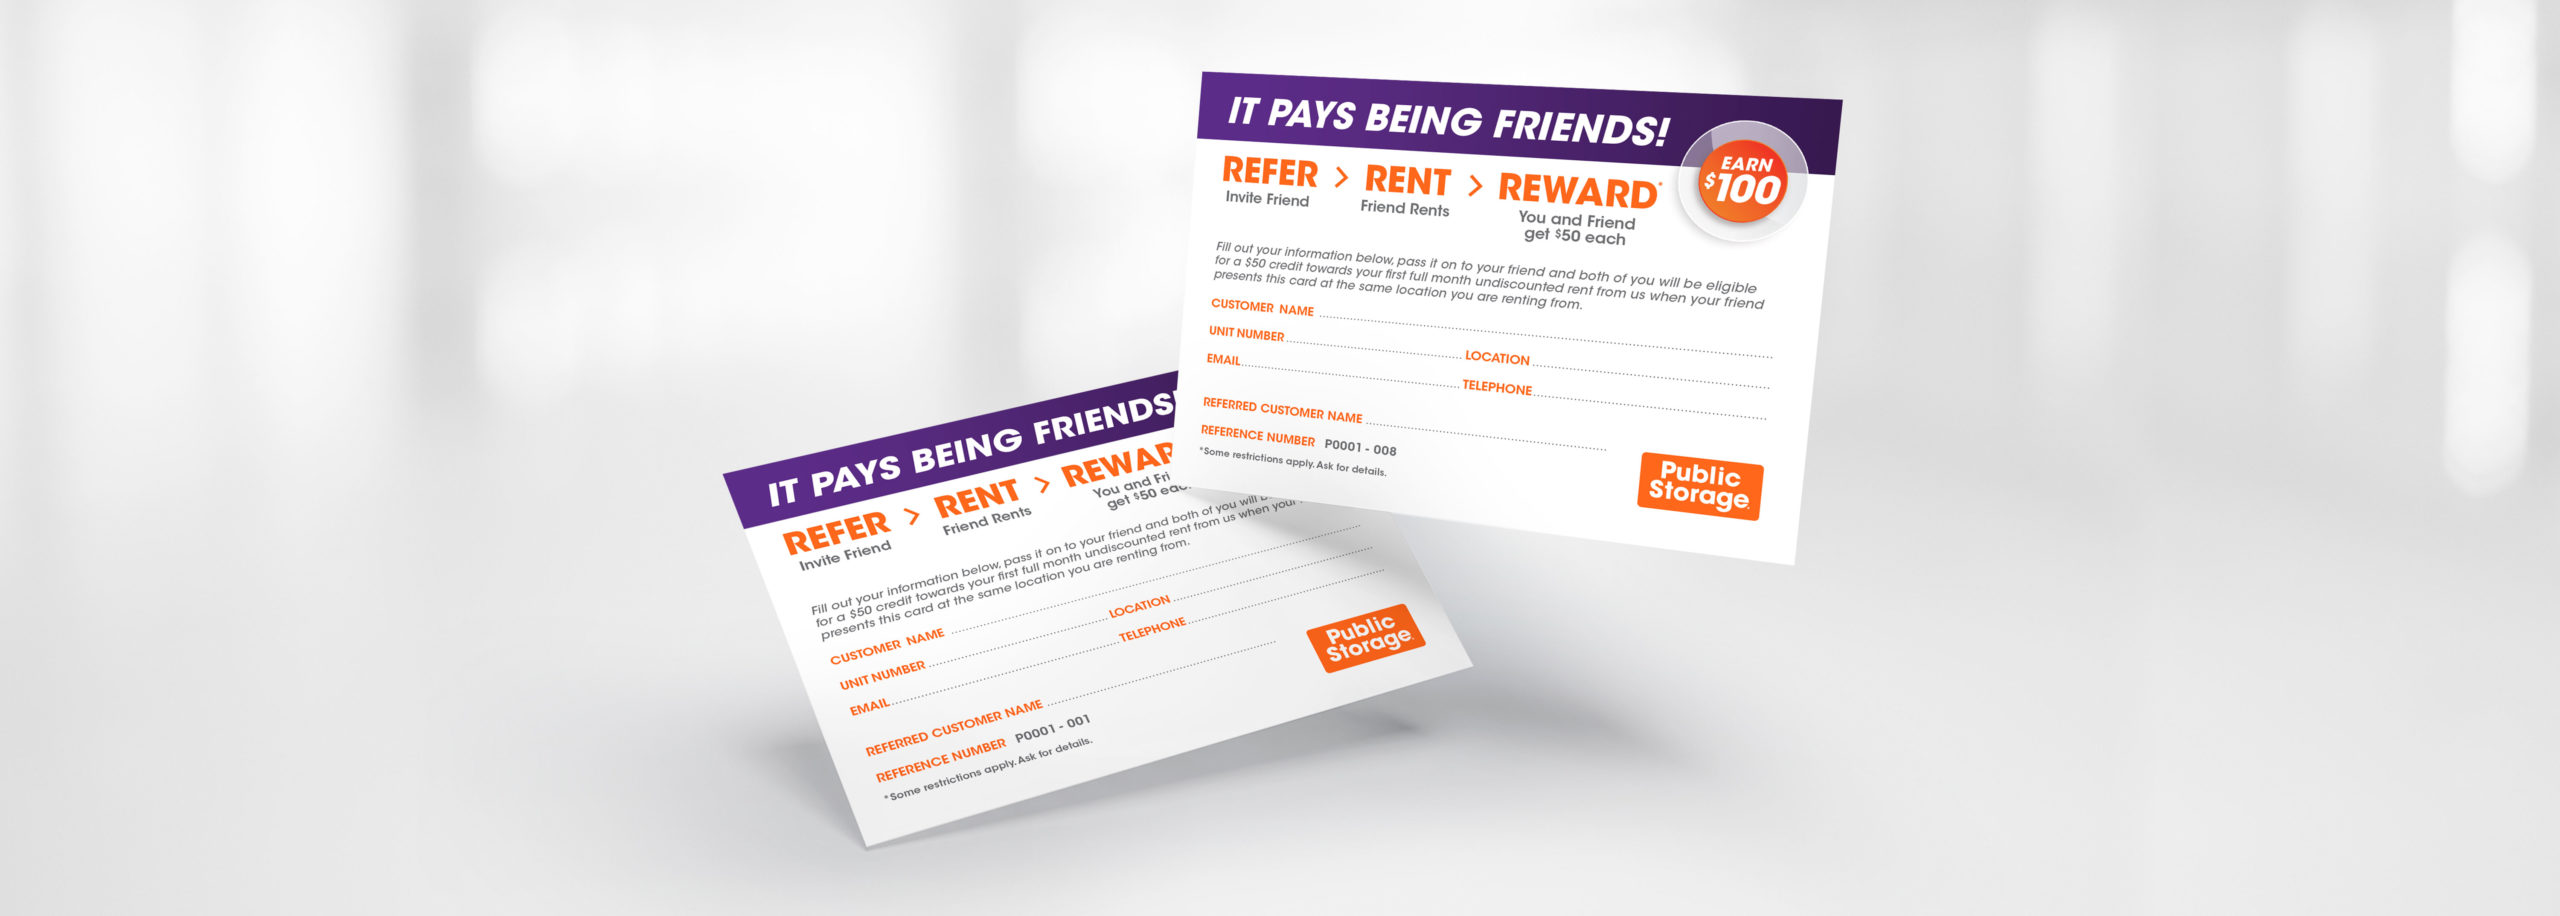 Referral cards for the "Refer a Friend" program